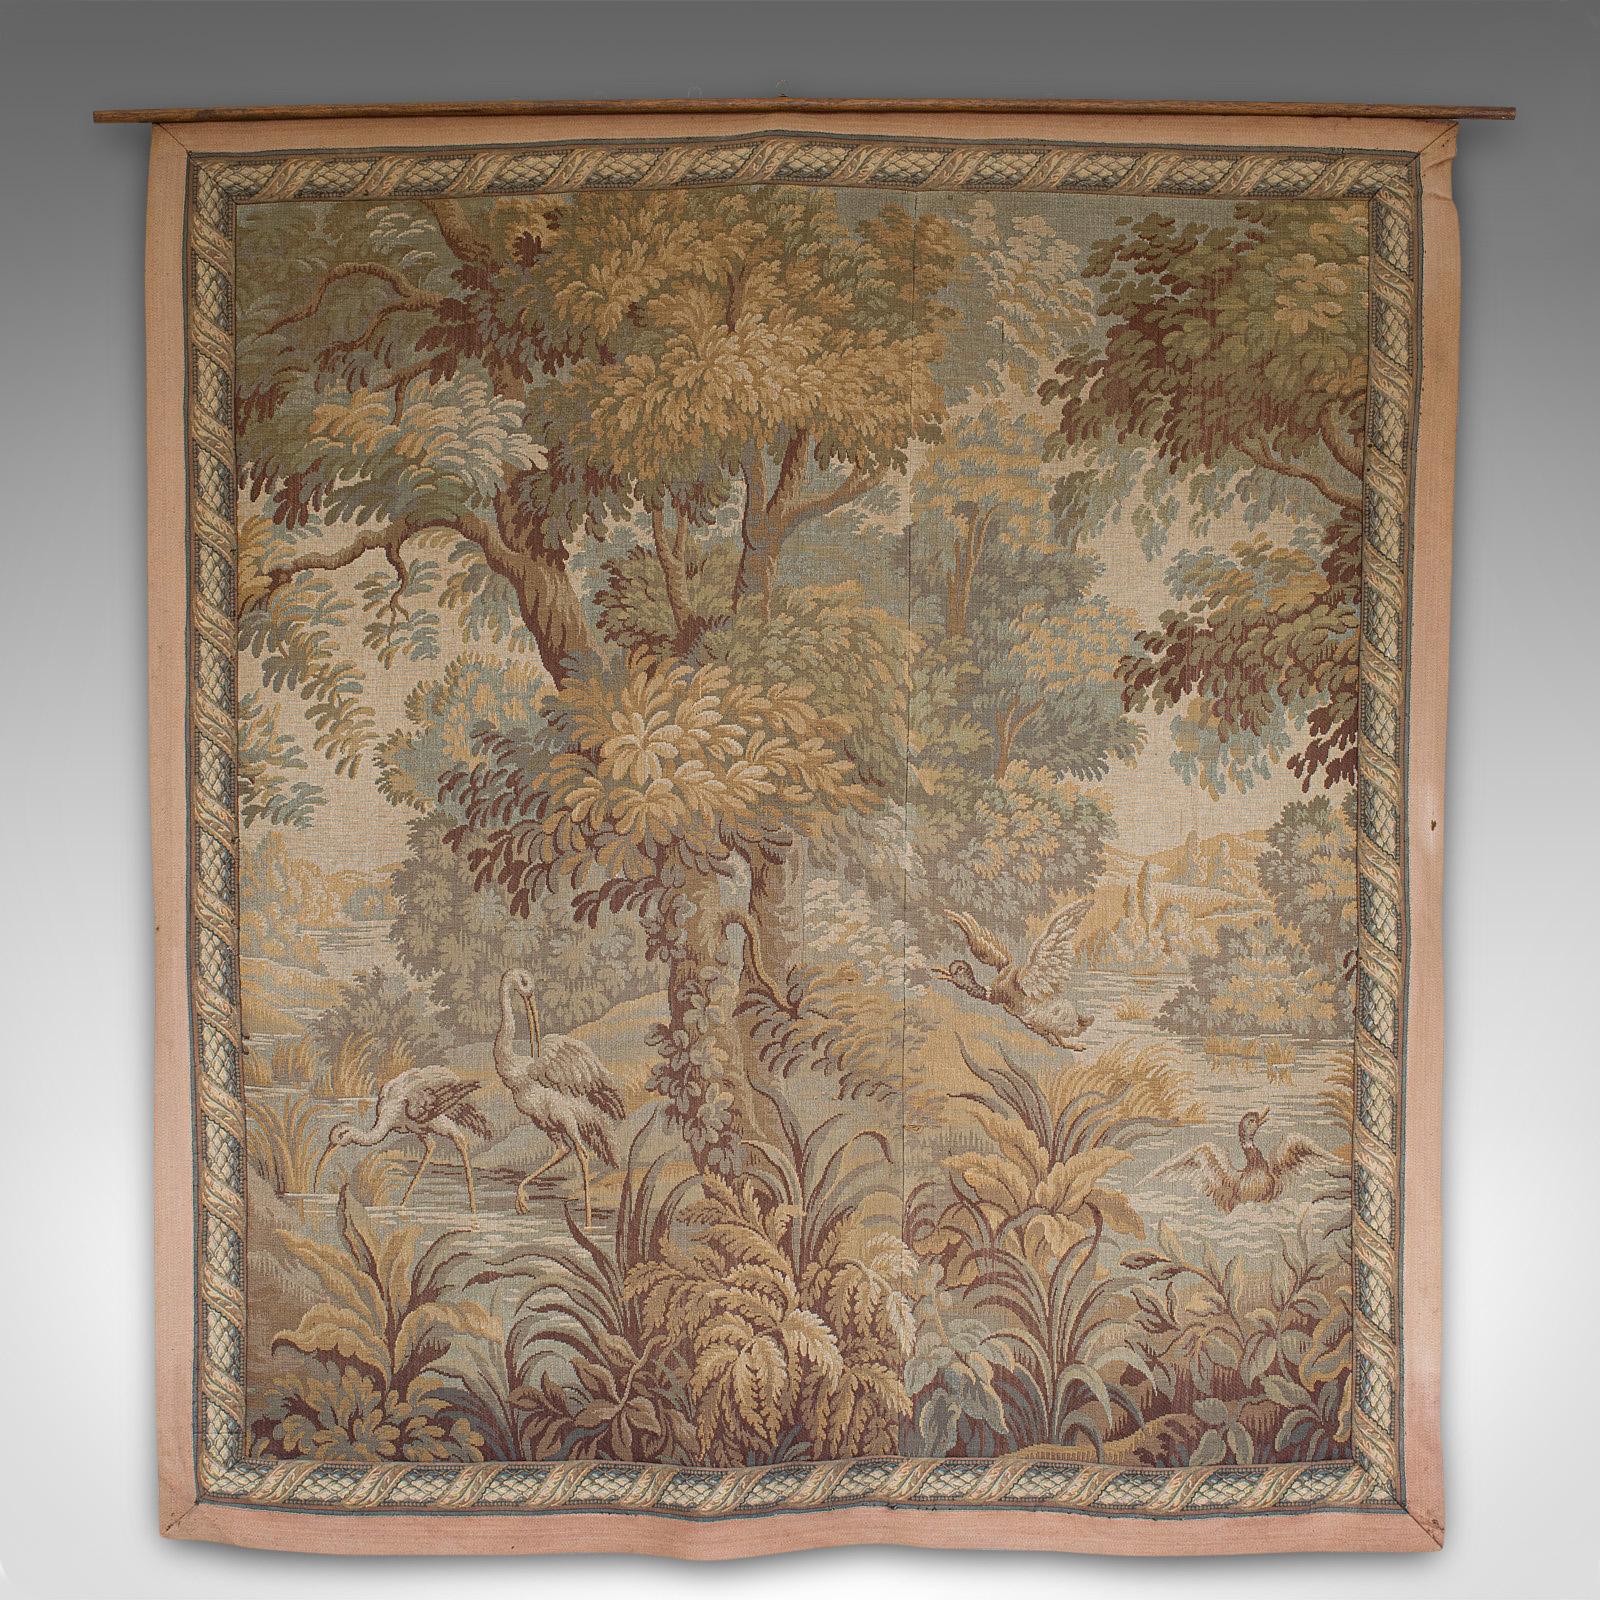 This is an antique verdure tapestry. A Continental, textile wall-hanging decorative piece, dating to the Victorian period, circa 1900.

Classical verdure forest scene
Displays a desirable aged patina
Woven textile in good order and displaying